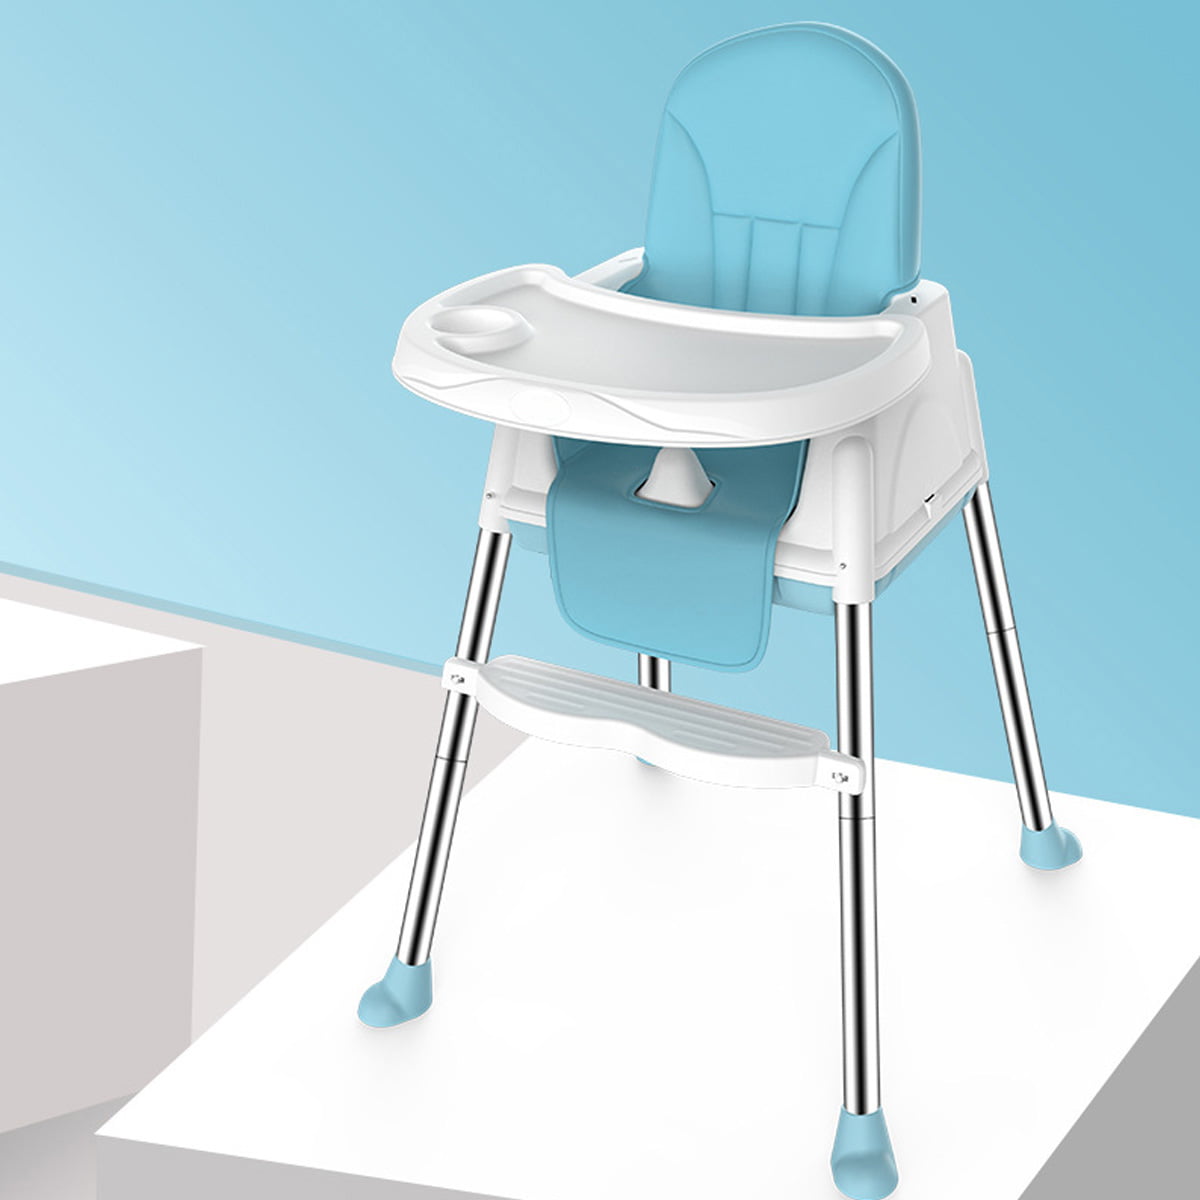 Foldable & Portable Height Chair for Toddlers Blue Adjustable Little Bosses R Us Foldable Baby High Chair Seat with Footrest